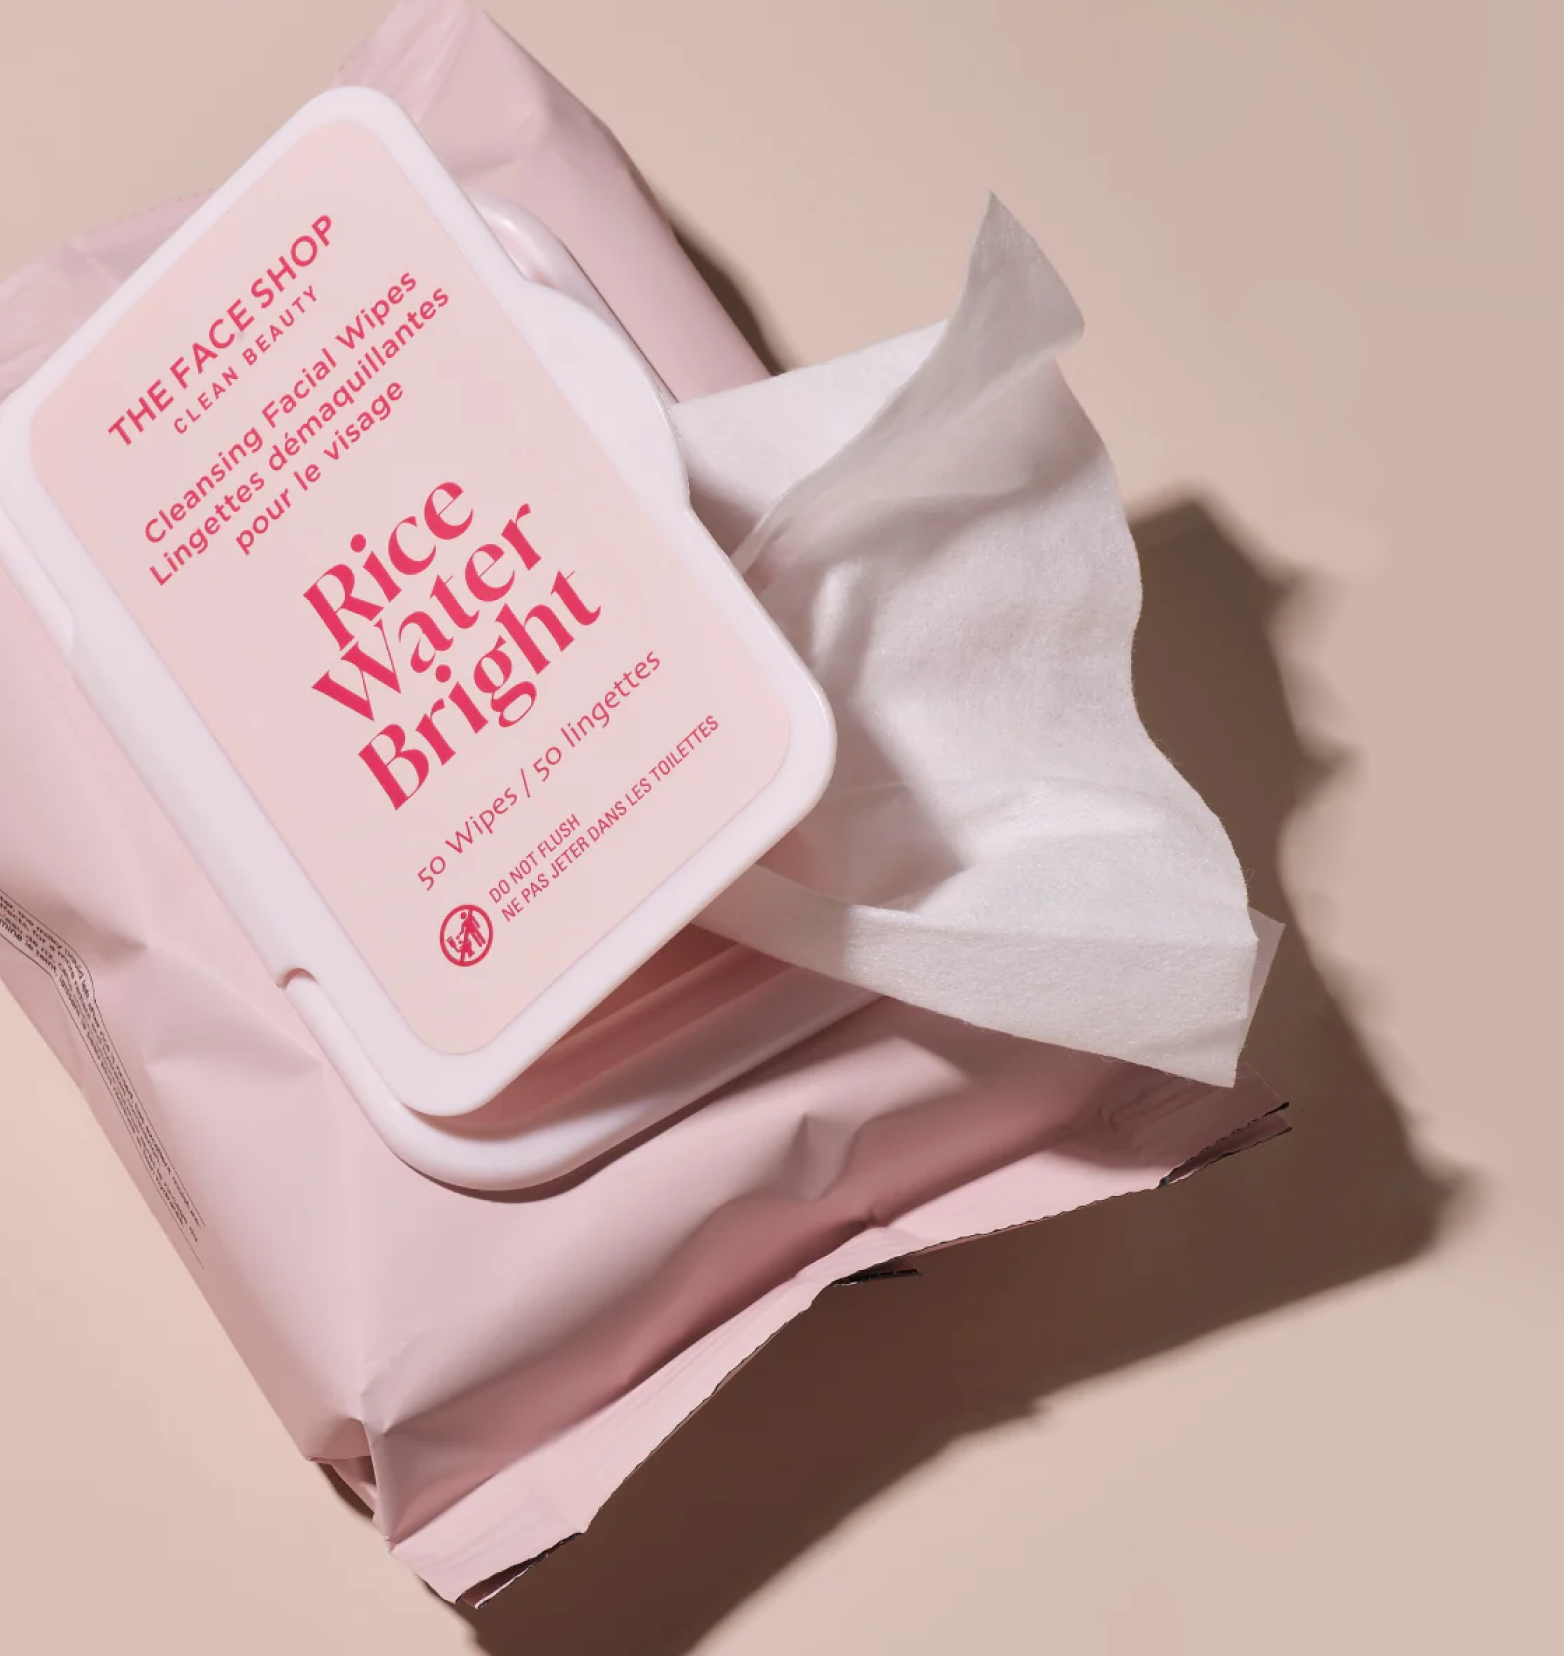 An open pack of The Face Shop Rice Water Bright Cleansing Facial Wipes with one tissue wipe slightly pulled out on a warm beige background.